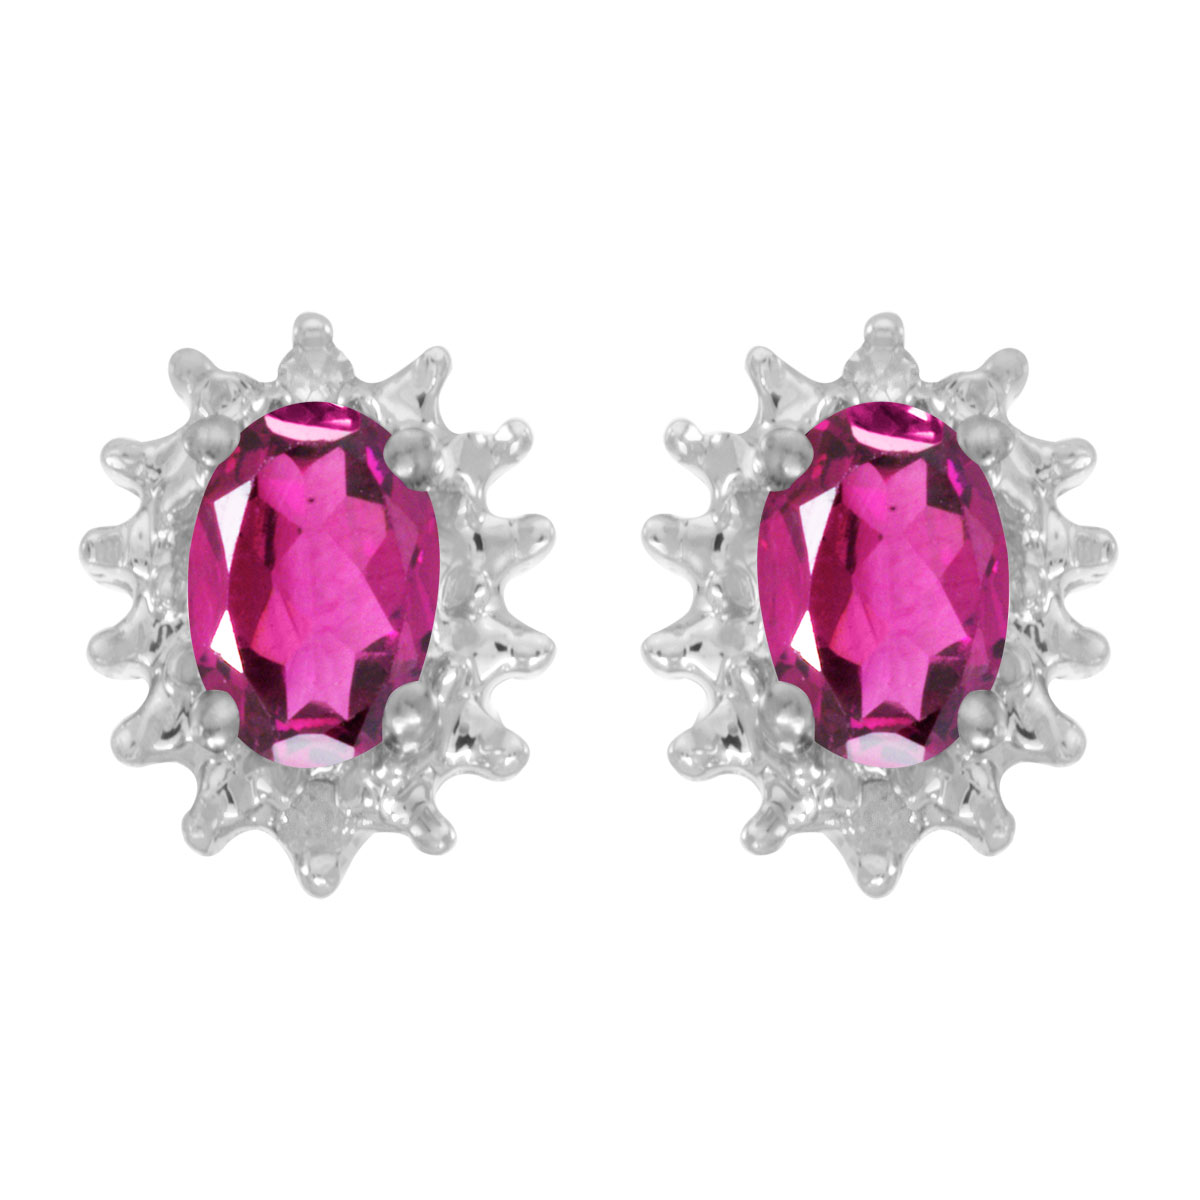 JCX2013: These 14k white gold oval pink topaz and diamond earrings feature 6x4 mm genuine natural pink topazs with a 0.86 ct total weight and .04 ct diamonds.